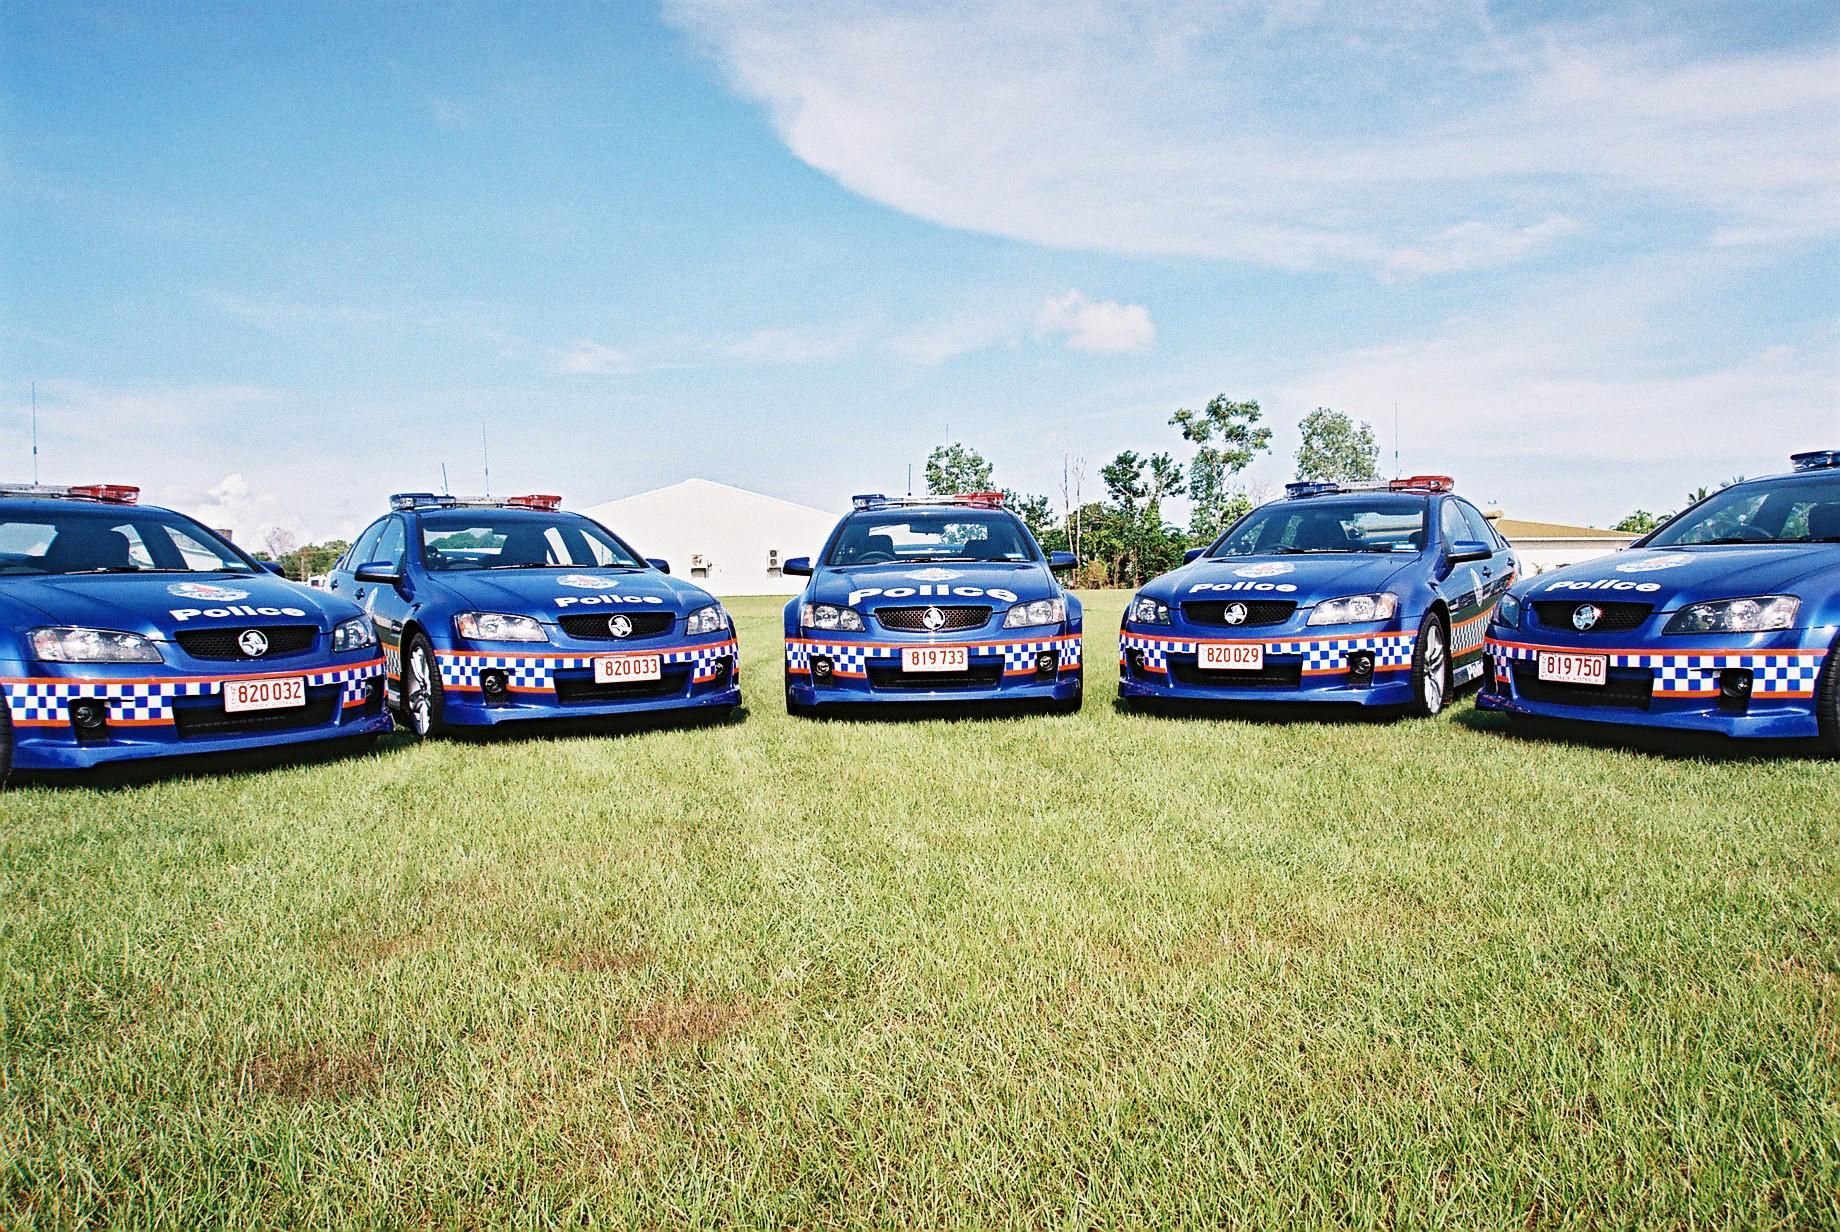 2007 Holden VE Commodore Police Car